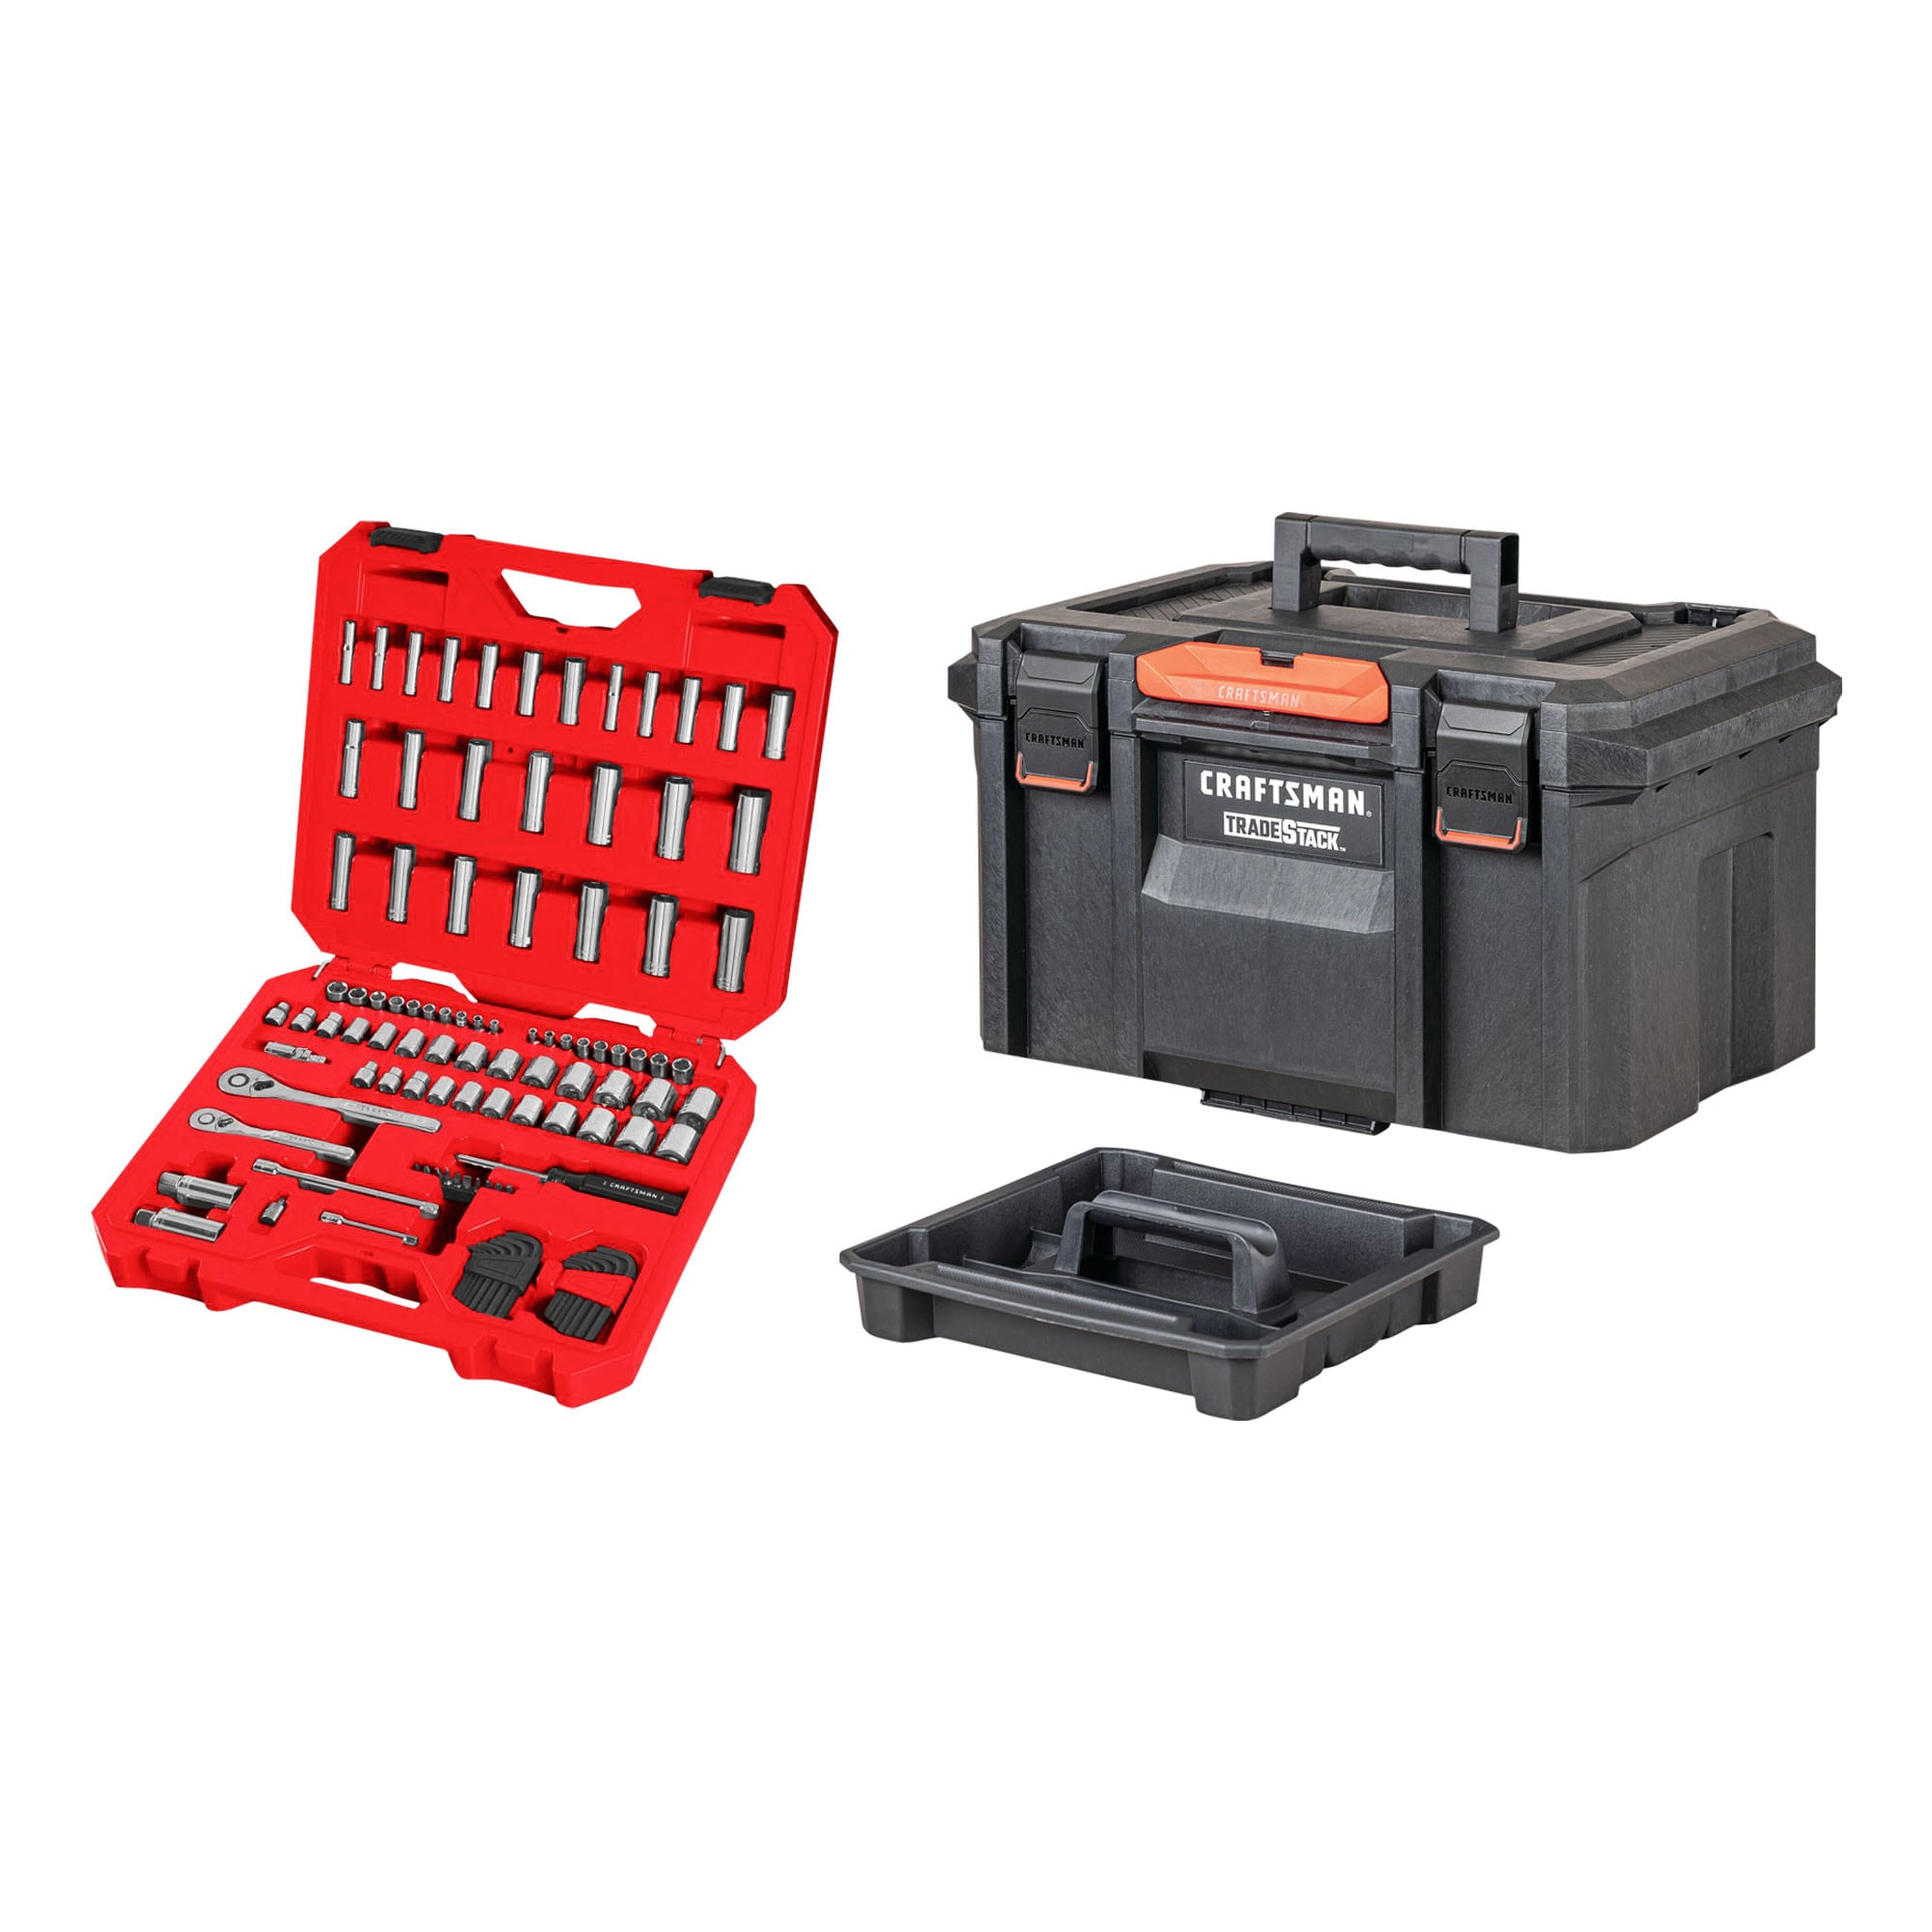 CRAFTSMAN TRADESTACK System 21.625-in-Drawer Black Structural Foam Lockable Tool Box & 105-Piece Standard (SAE) and Metric Combination Polished